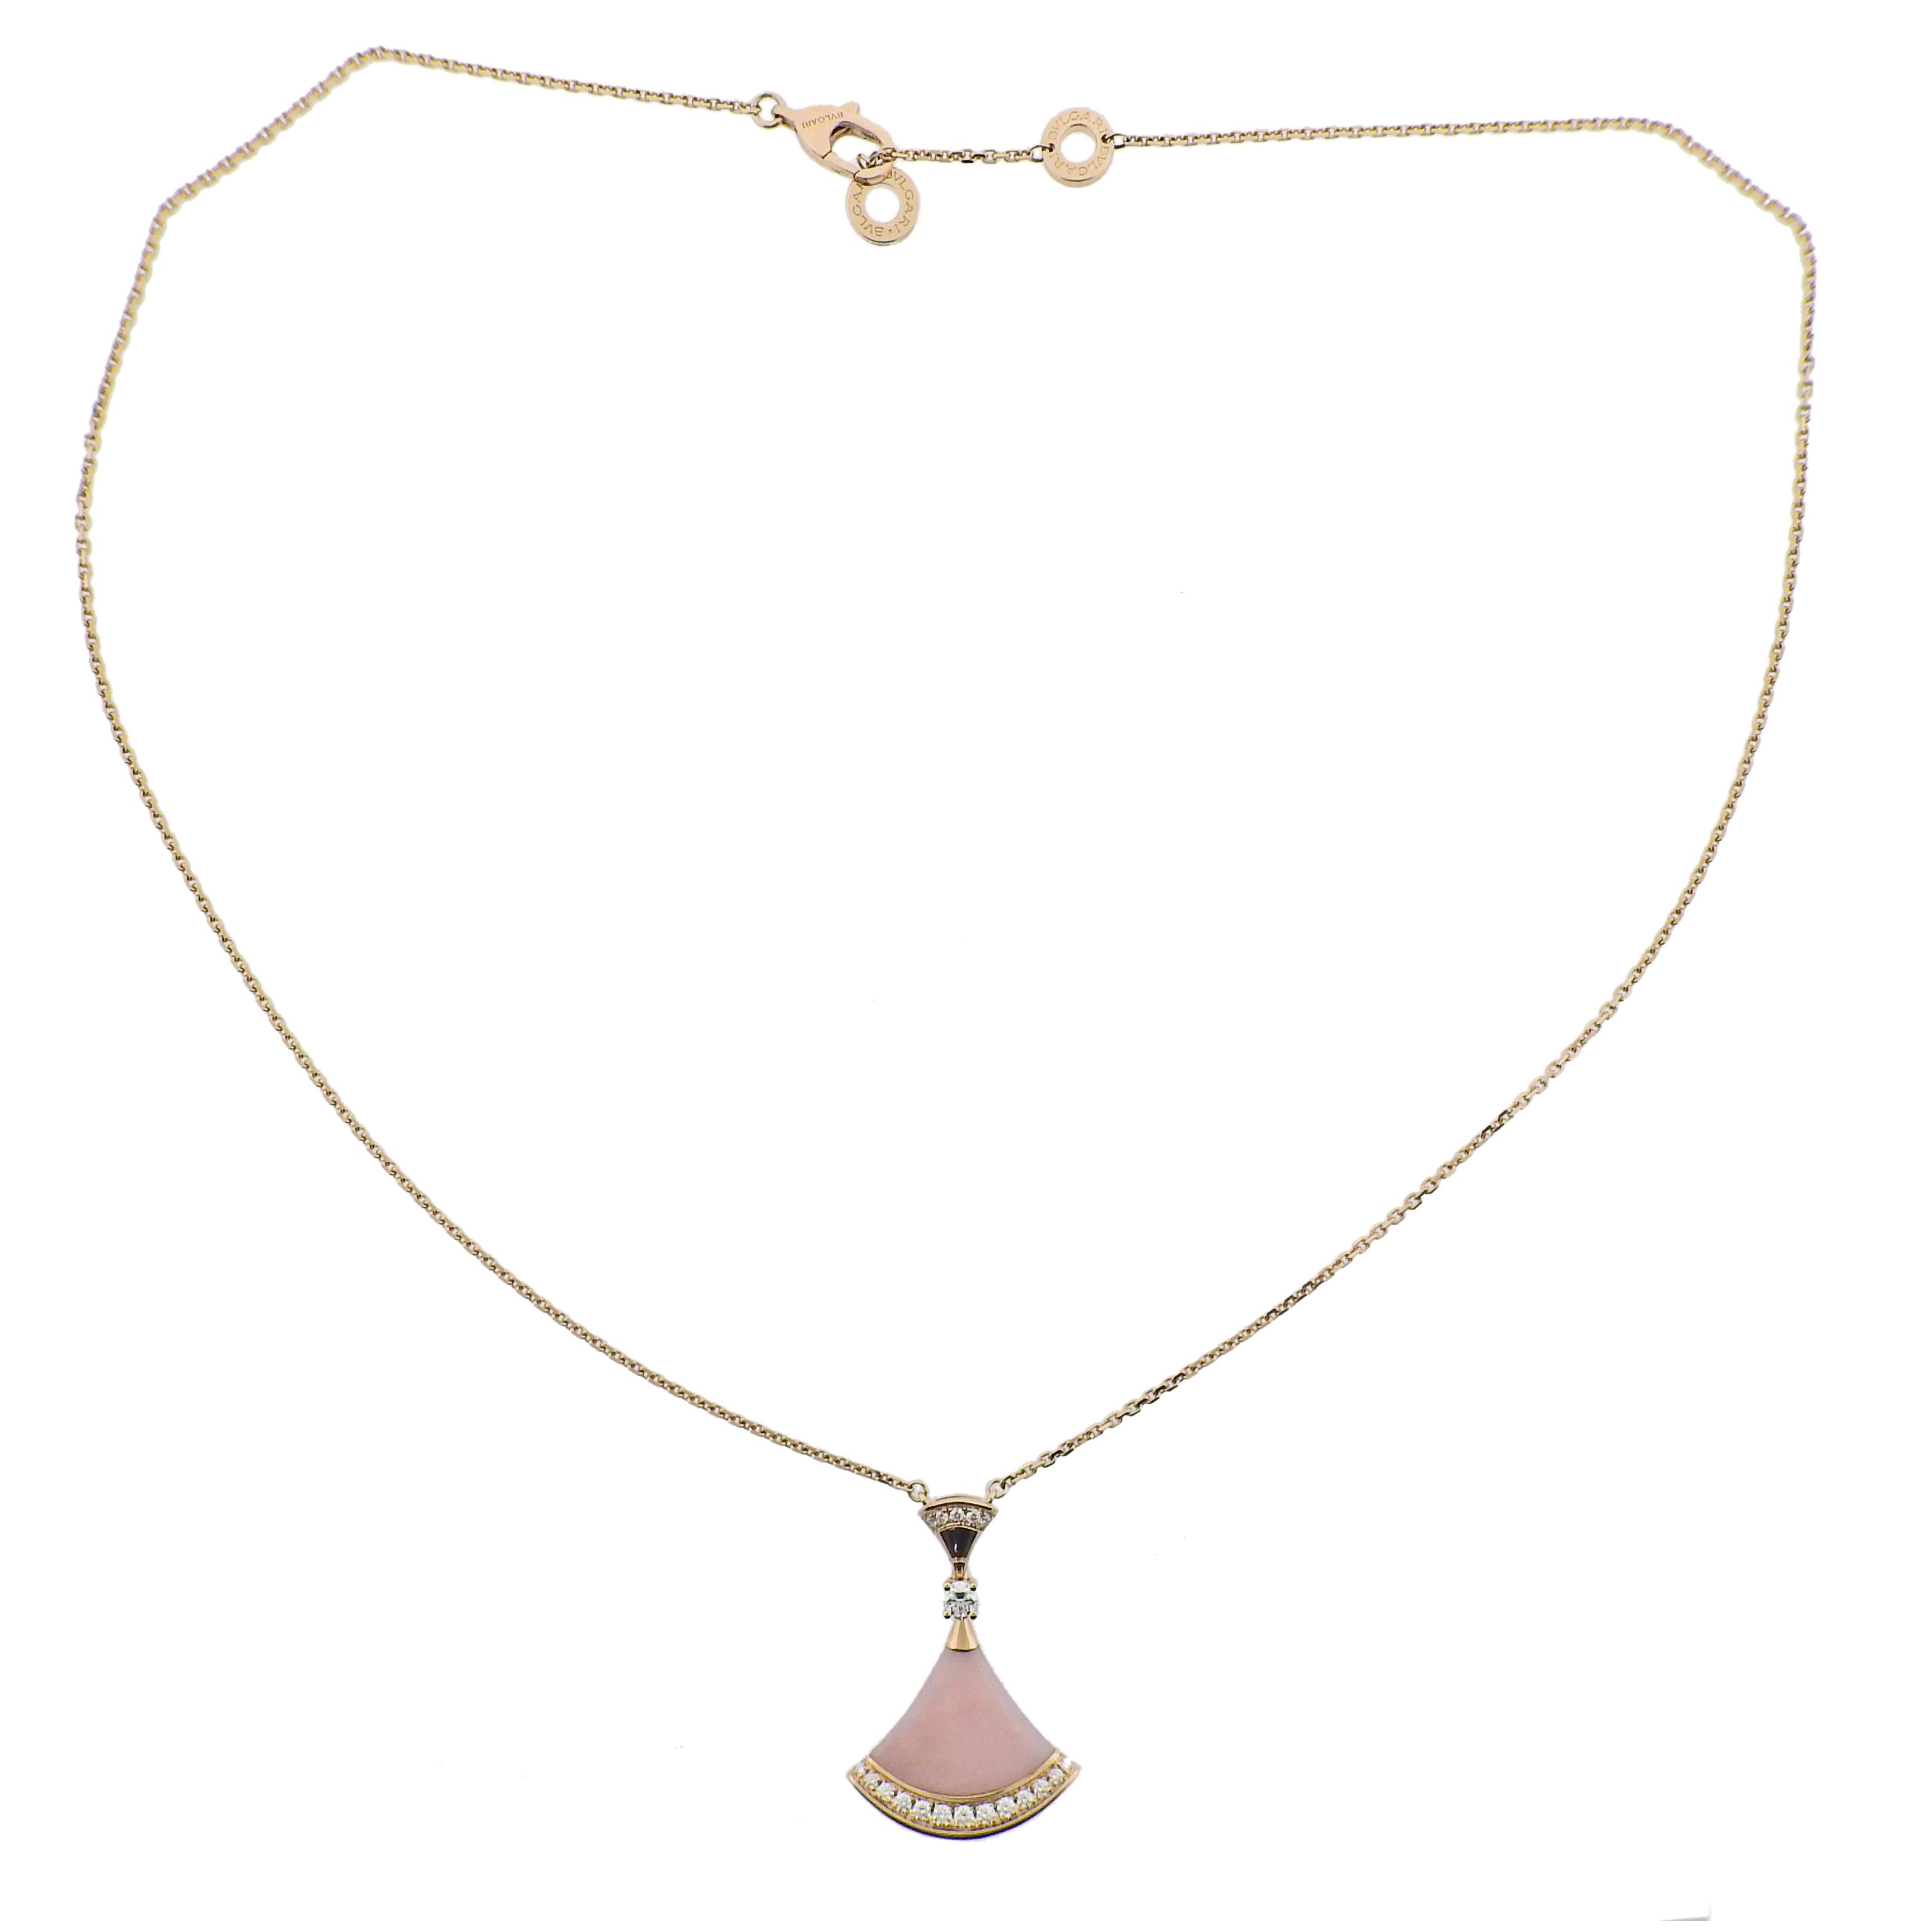 18k rose gold Bvlgari Diva's Dream pendant necklace, with 0.58ct G/VS diamonds and pink opal. Retail $5050. Comes with COA and box. Necklace is 17